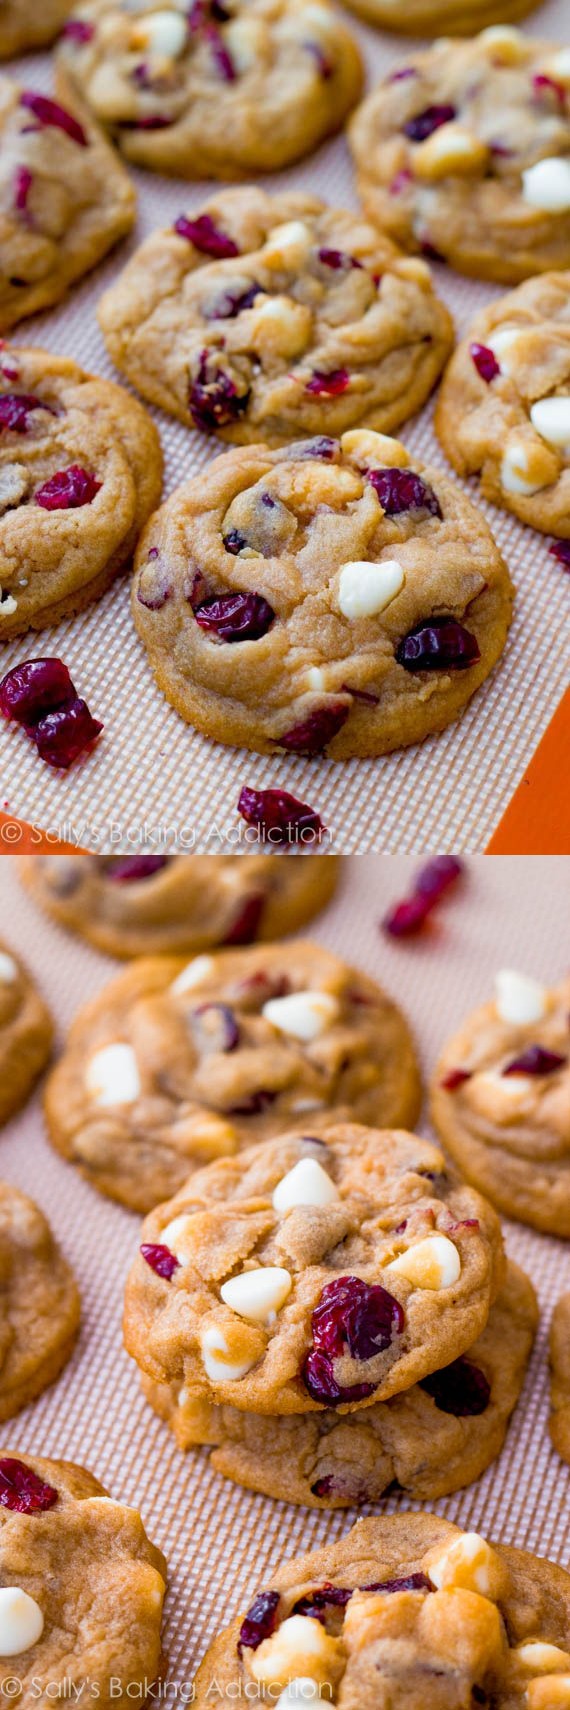 Soft-Baked White Chocolate Cranberry Cookies